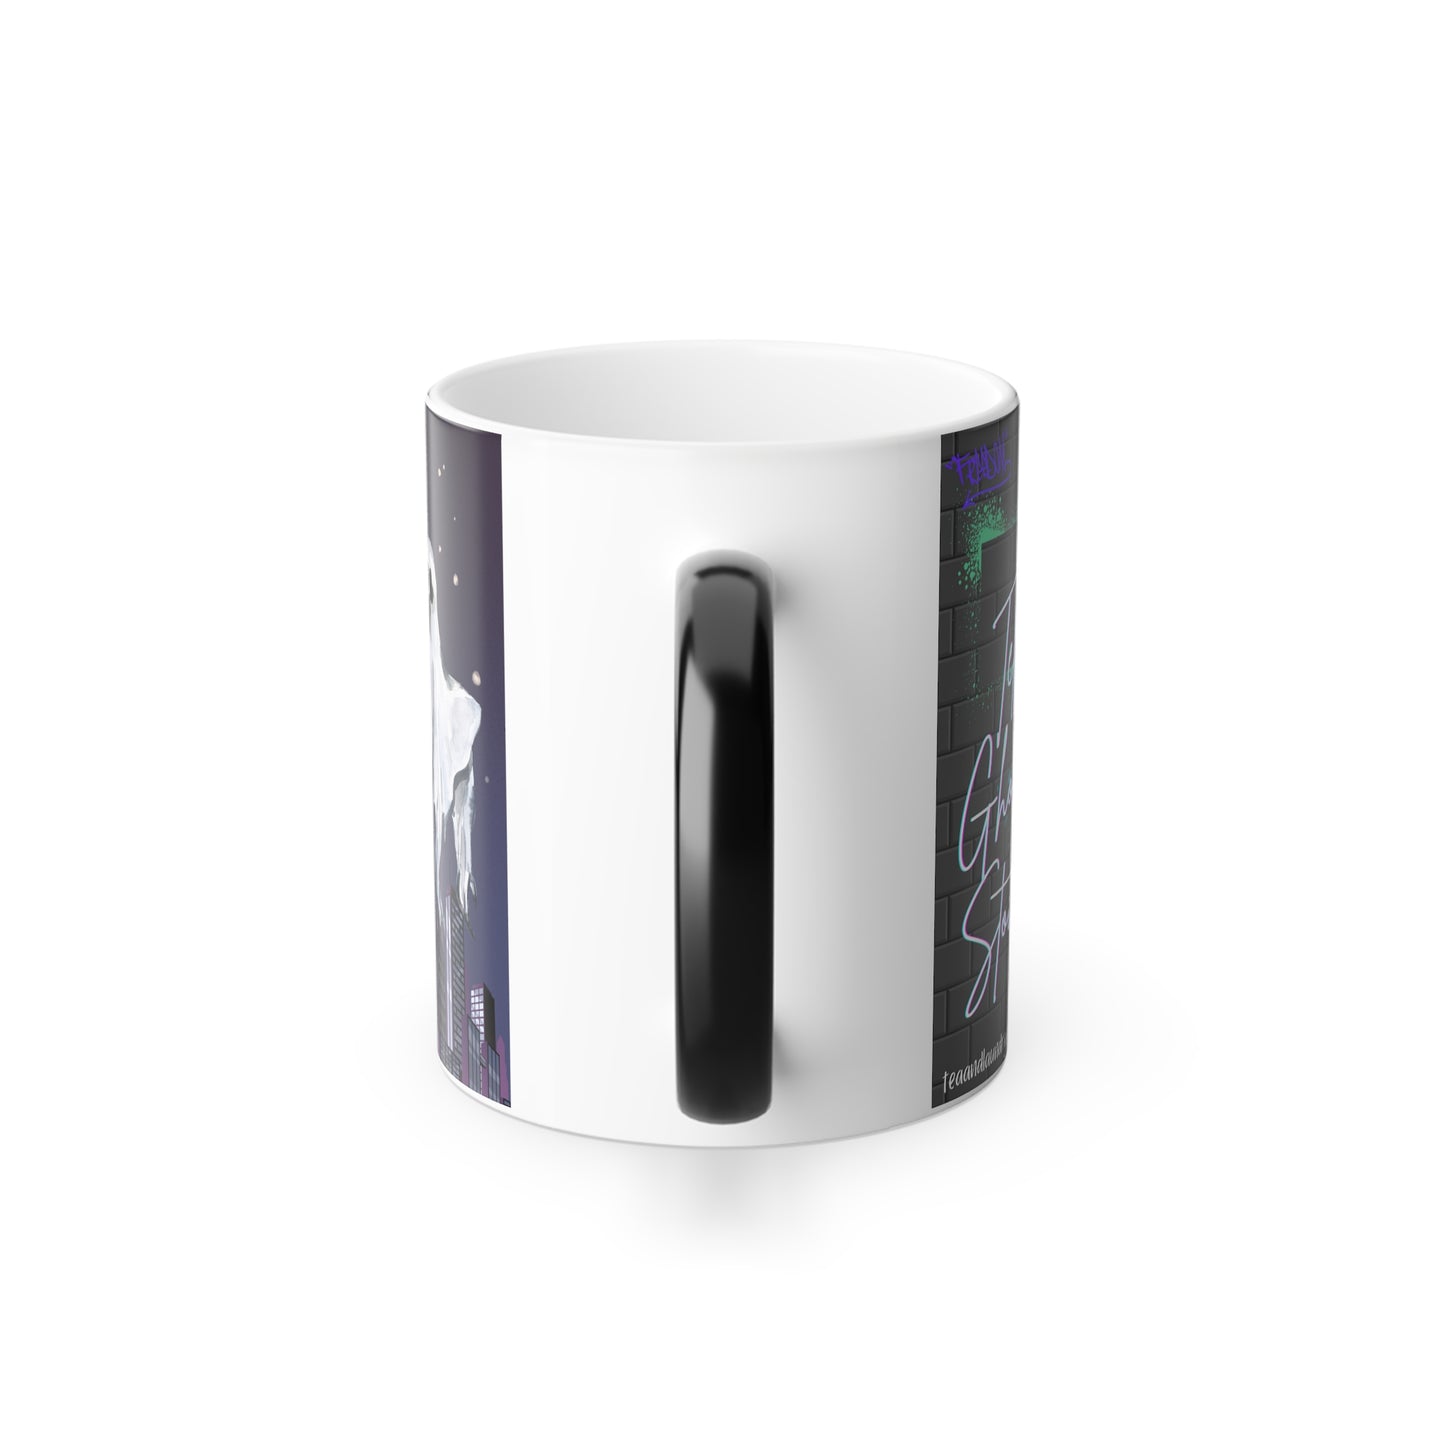 "Tell Ghost Stories" Color Morphing Mug, 11oz